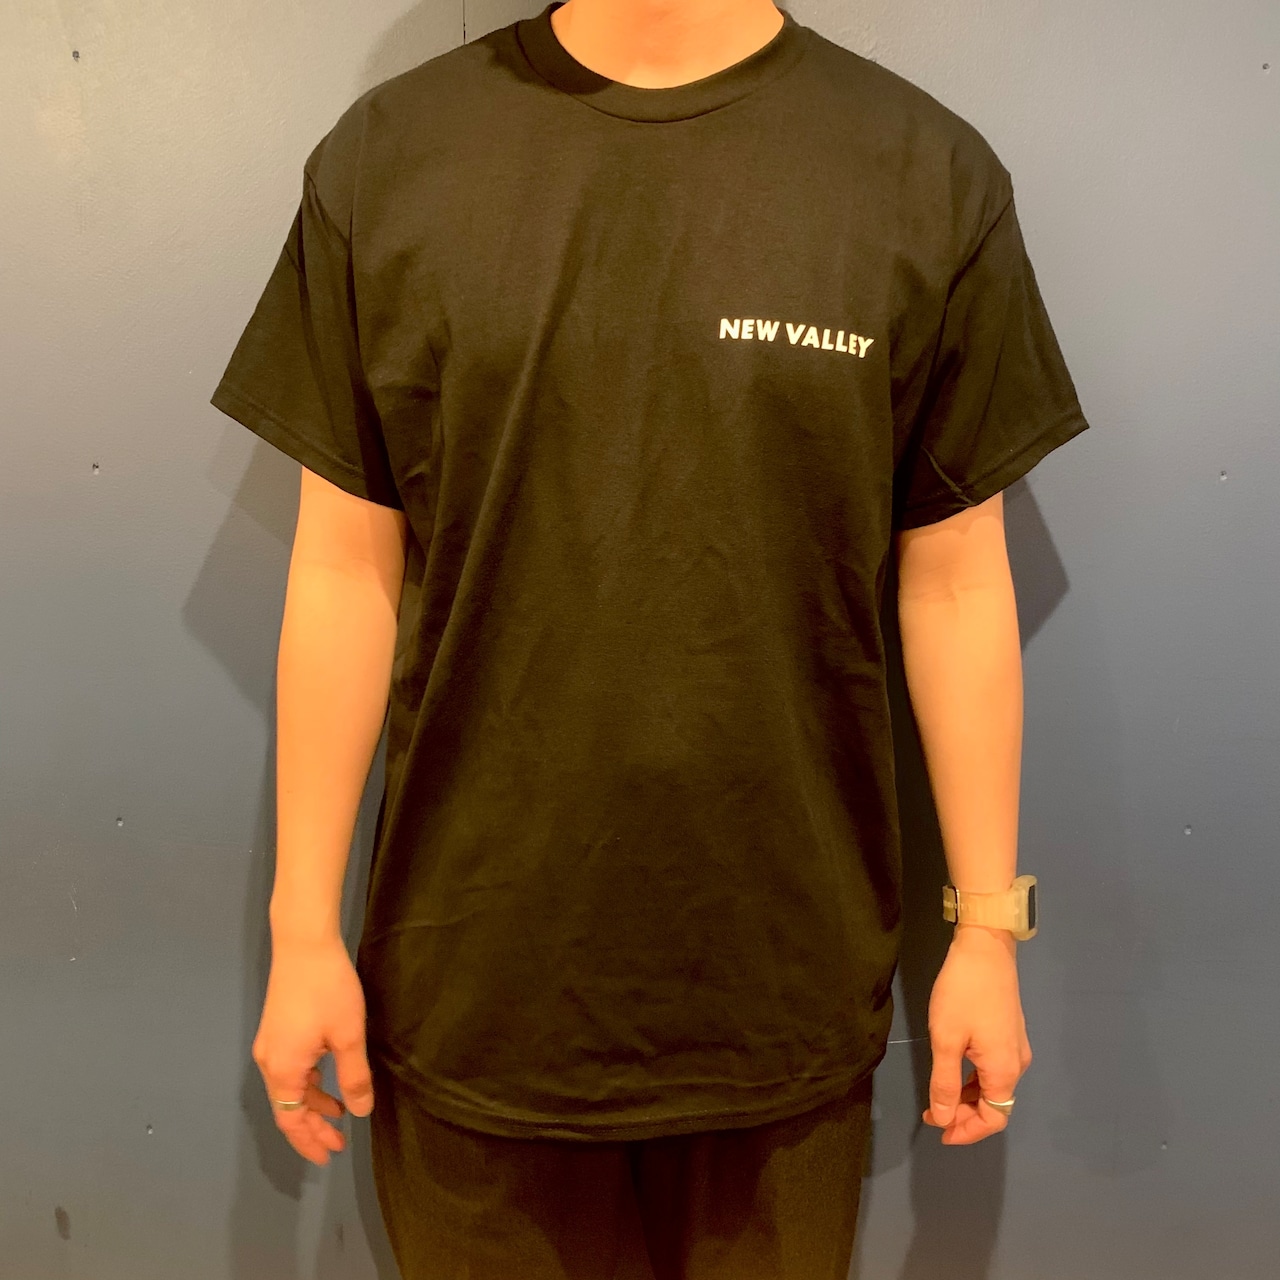 「NEWVALLEY」Tシャツ